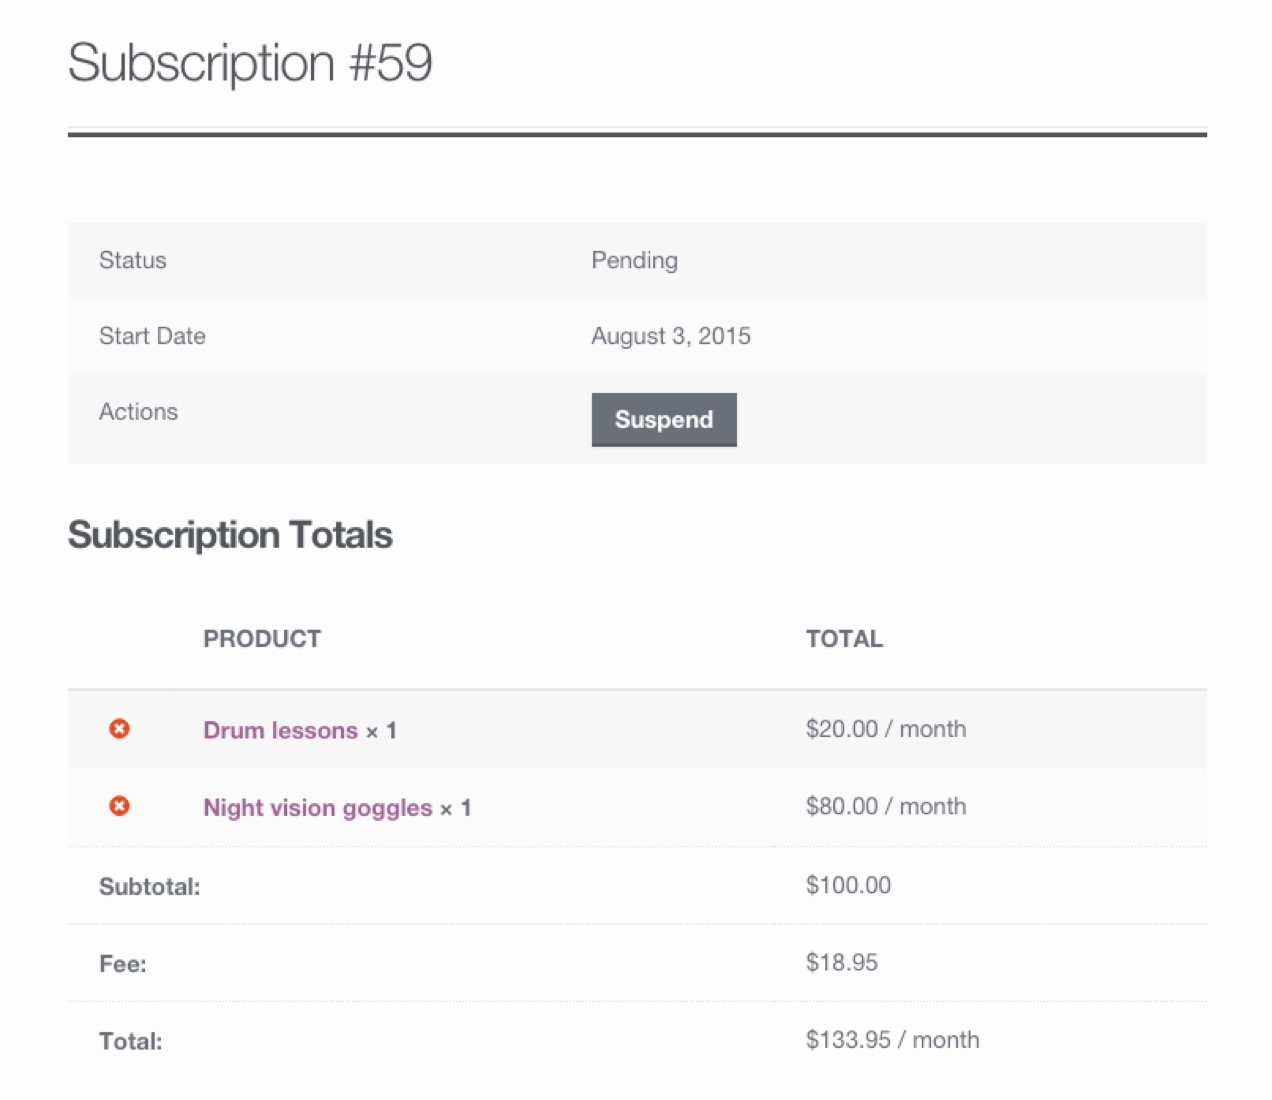 subscriptions viewed by the customer